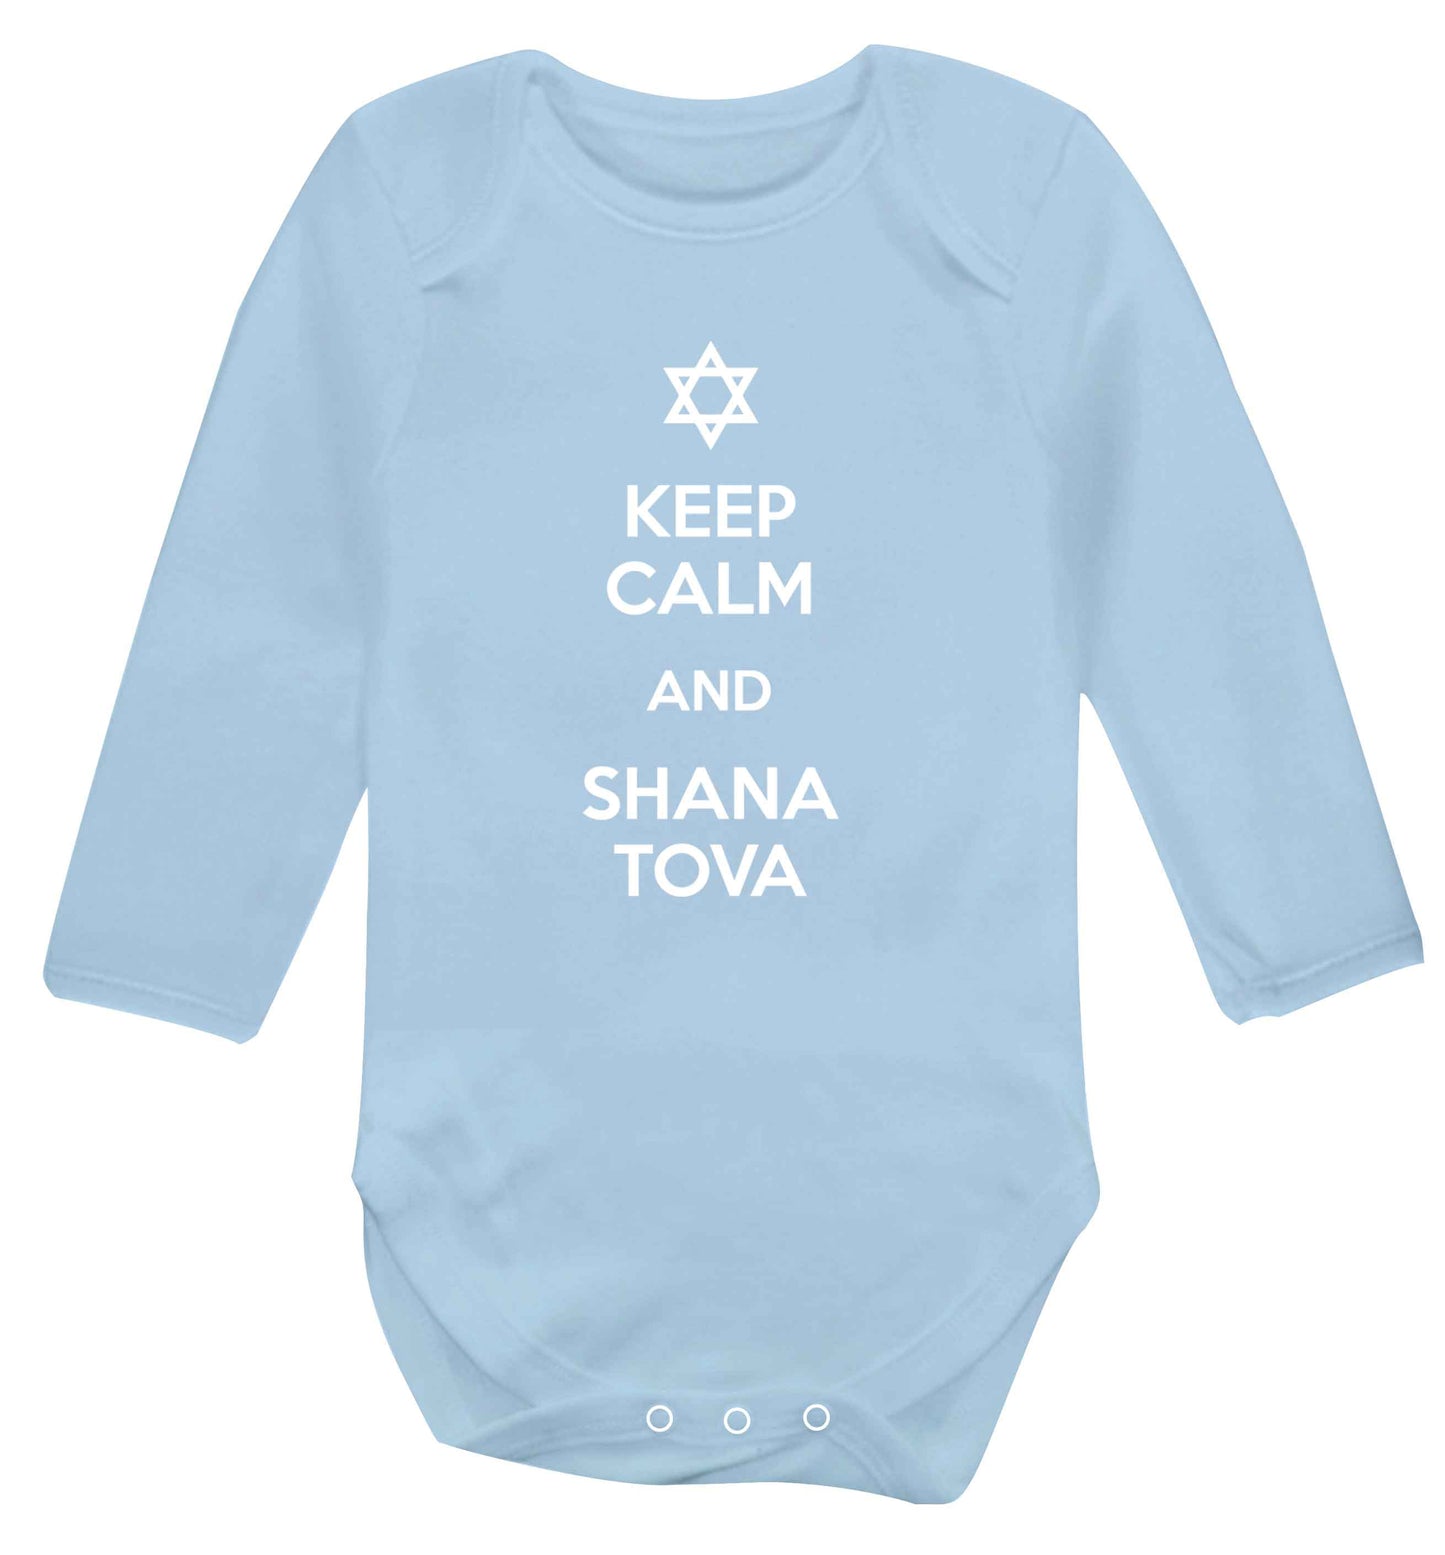 Keep calm and shana tova Baby Vest long sleeved pale blue 6-12 months